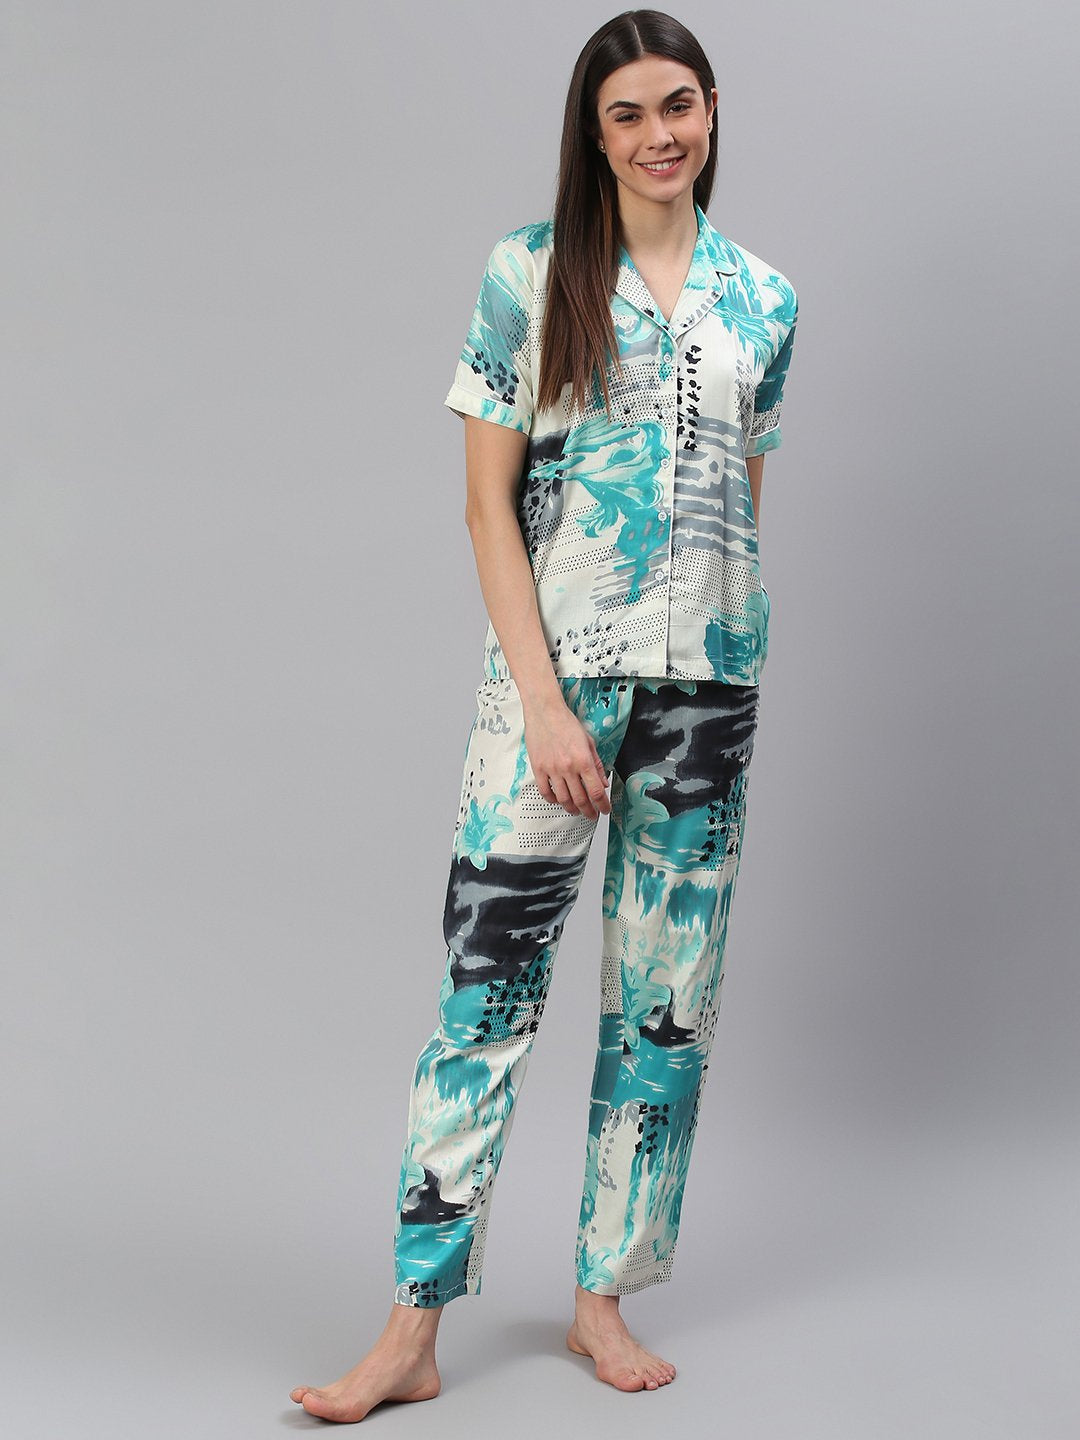 Cation White Blue Printed Night Suit